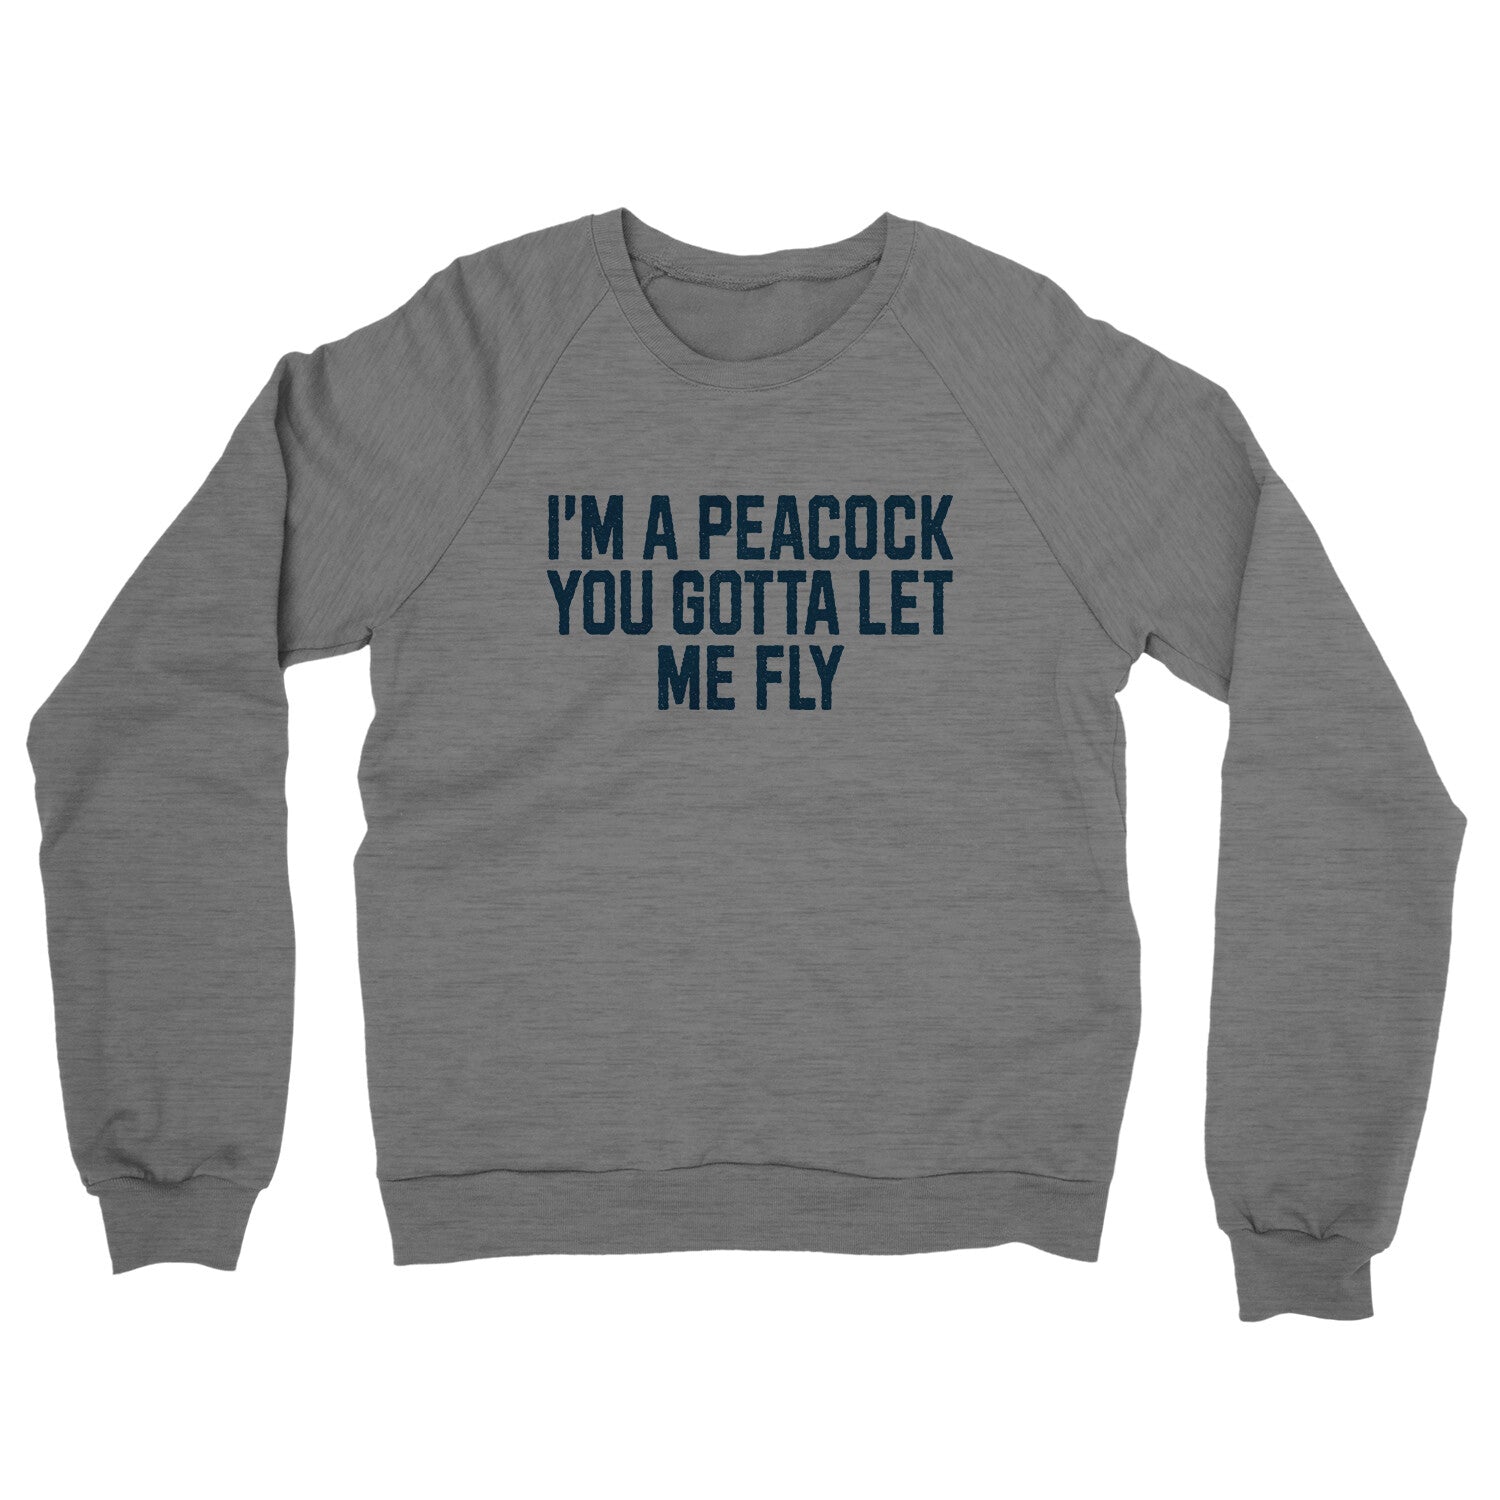 I'm a Peacock You Gotta Let me Fly in Graphite Heather Color